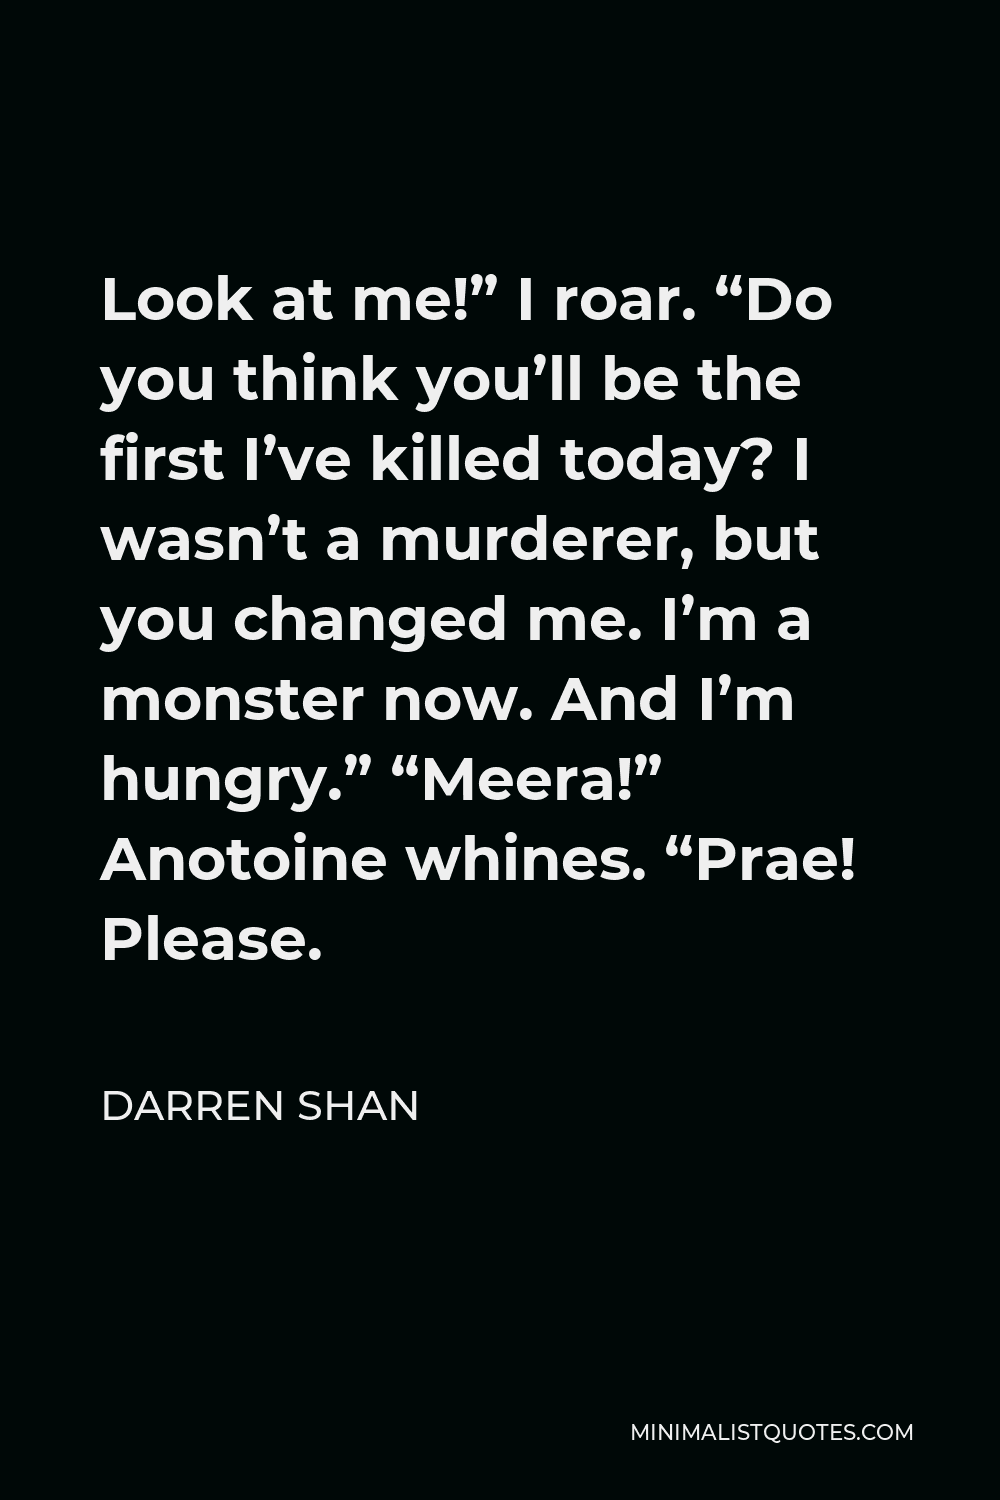 Darren Shan Quote - Look at me!” I roar. “Do you think you’ll be the first I’ve killed today? I wasn’t a murderer, but you changed me. I’m a monster now. And I’m hungry.” “Meera!” Anotoine whines. “Prae! Please.